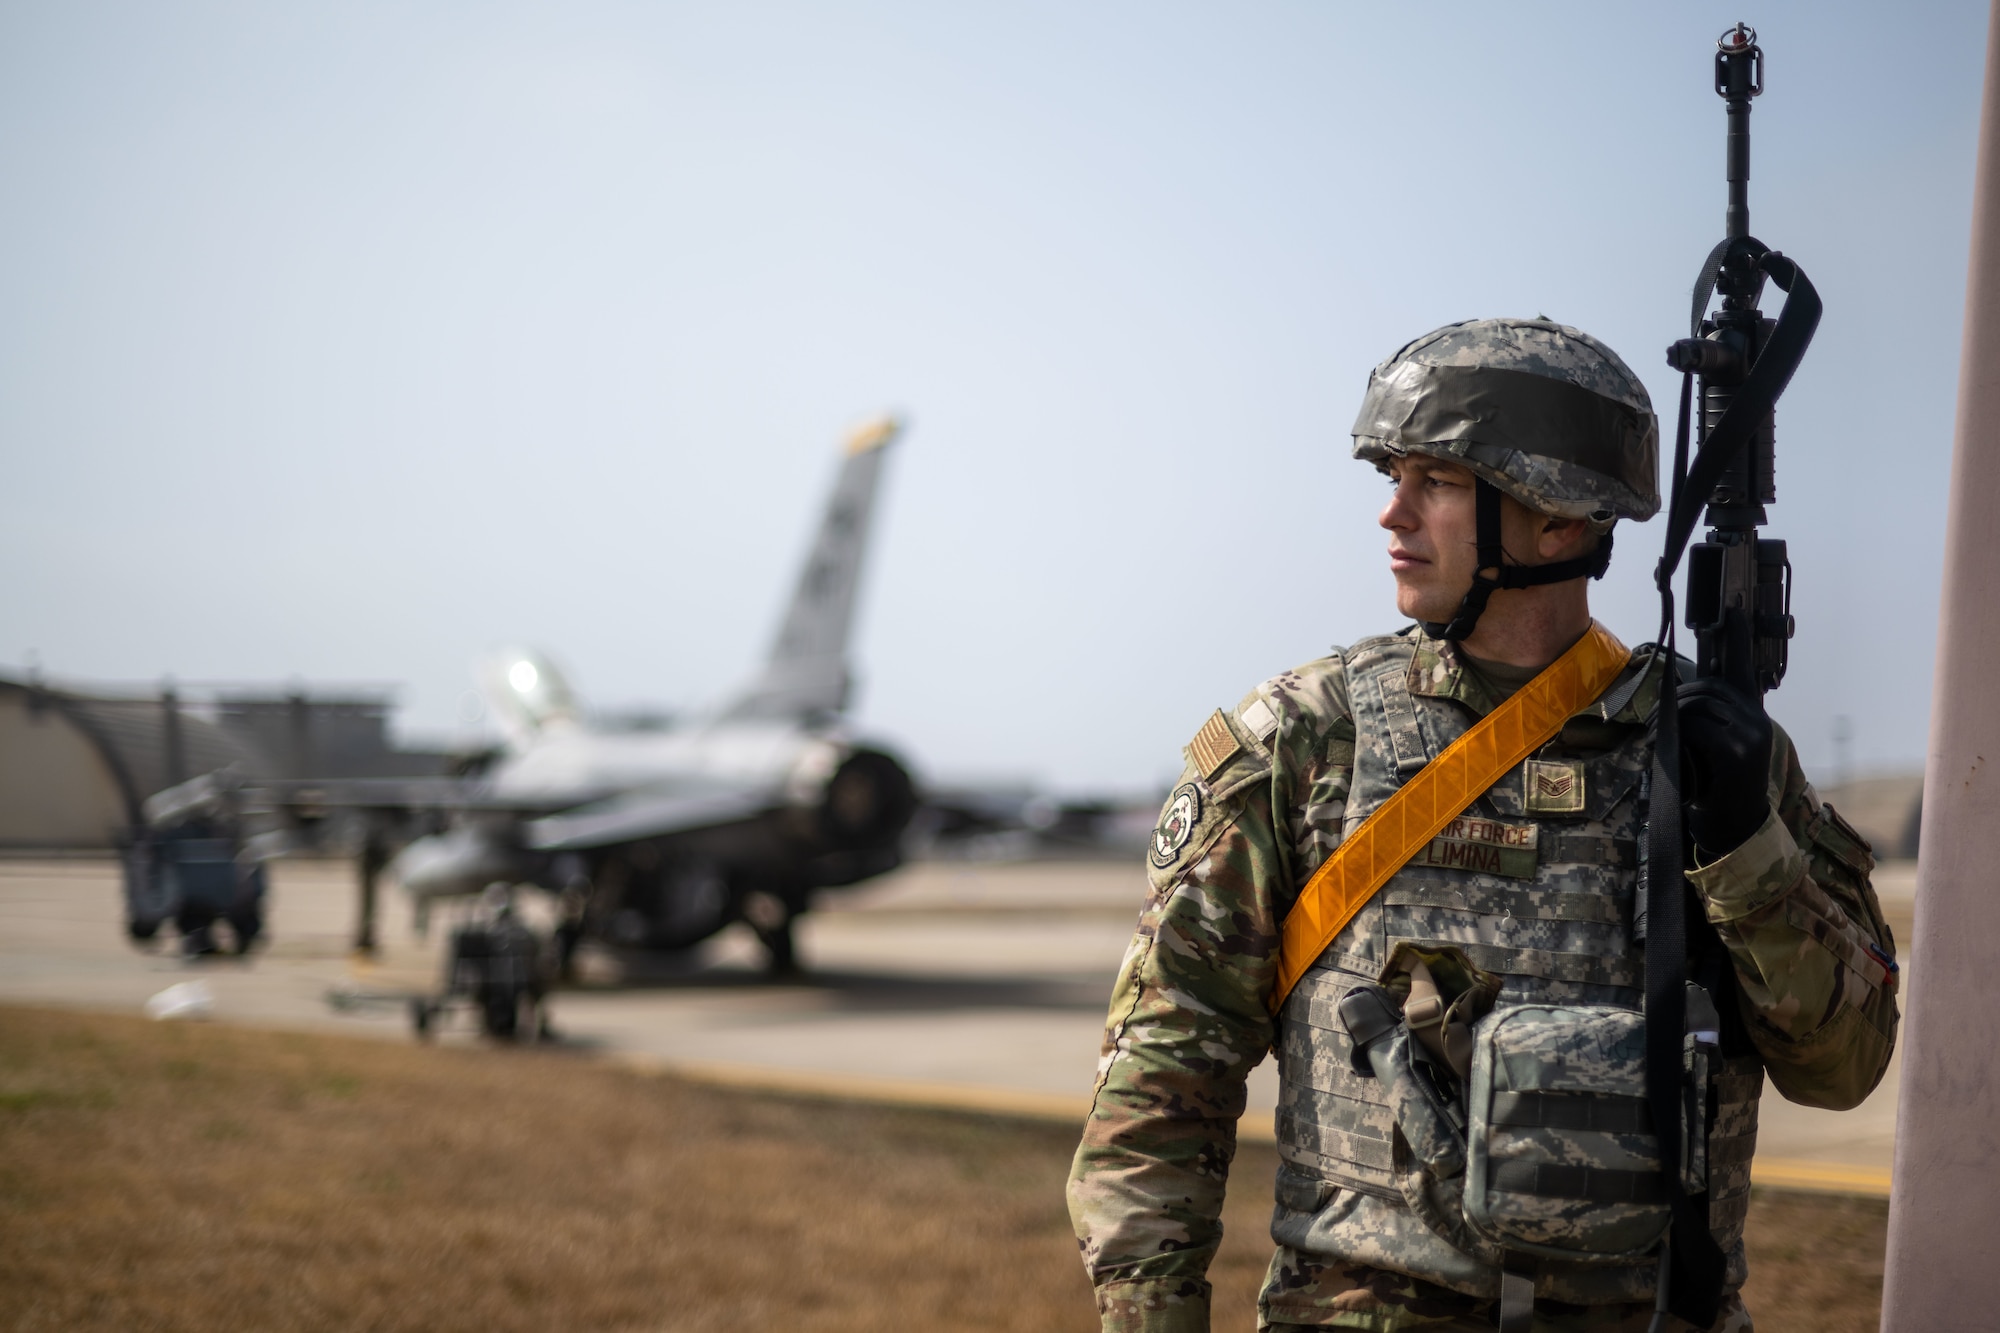 Staff Sgt. Chris Limina guards an F-16 Fighting Falcon through ongoing maintenance repairs.